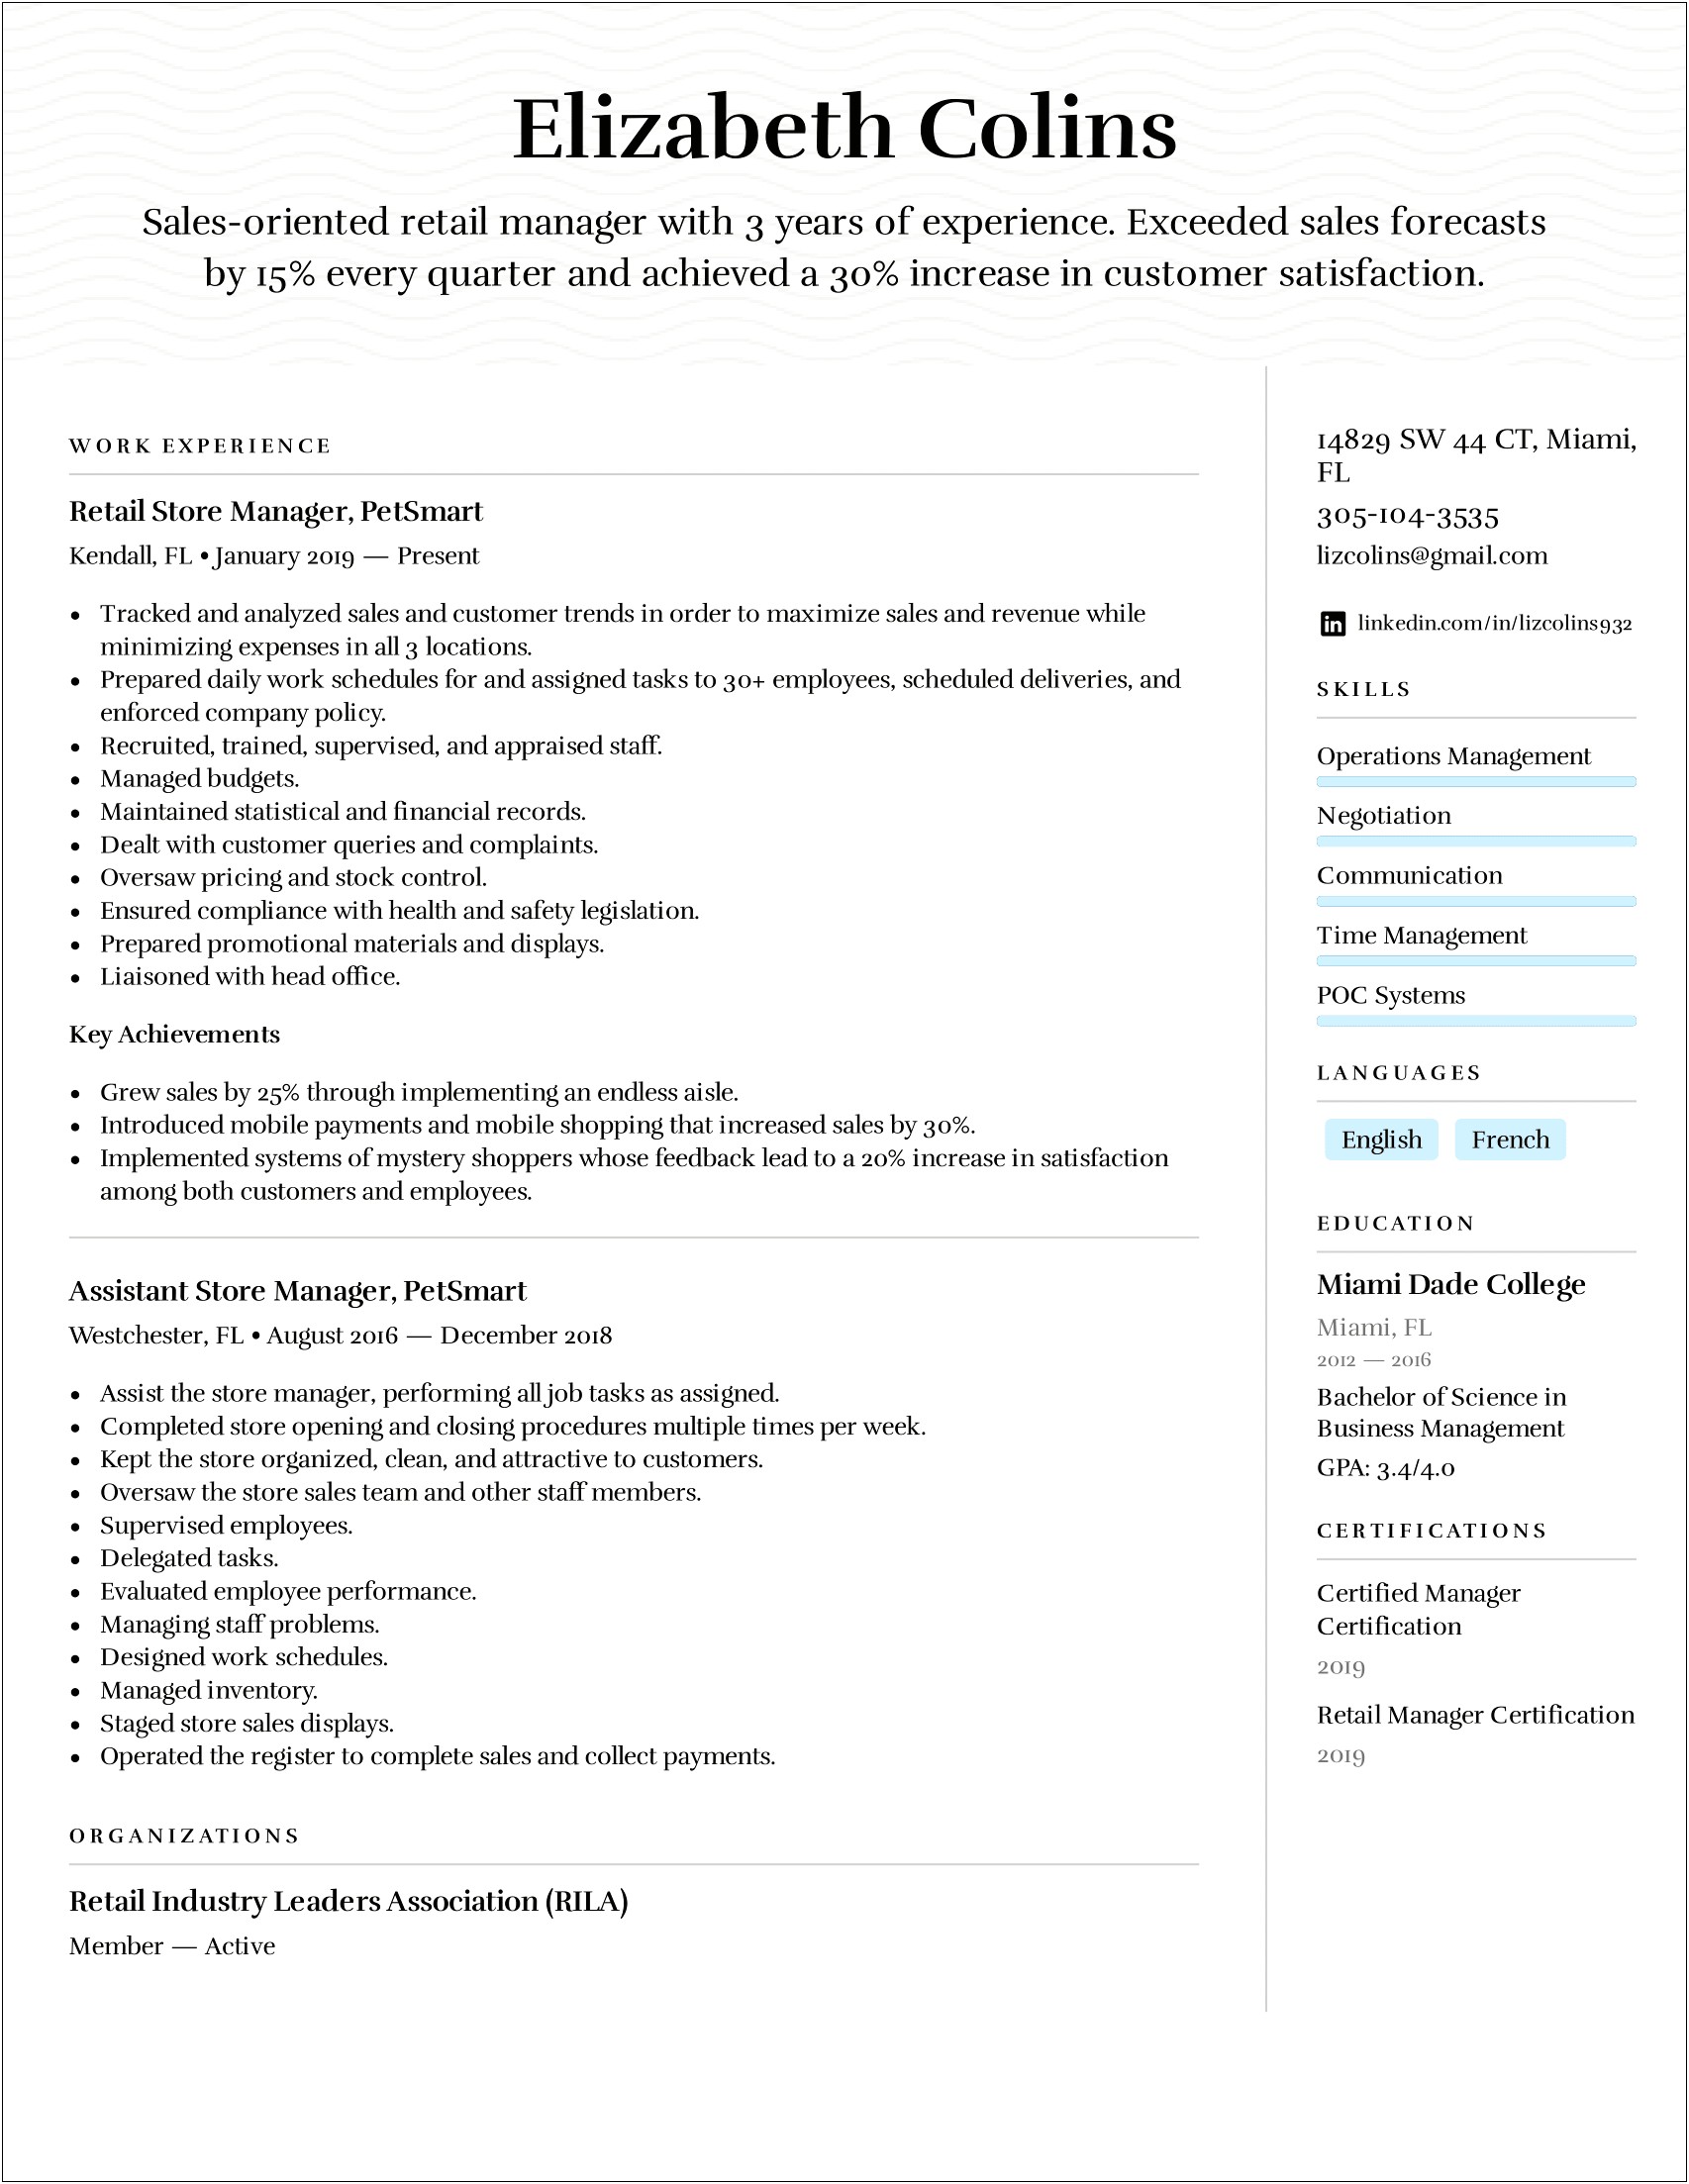 Assistant Sales Manager Resume Examples